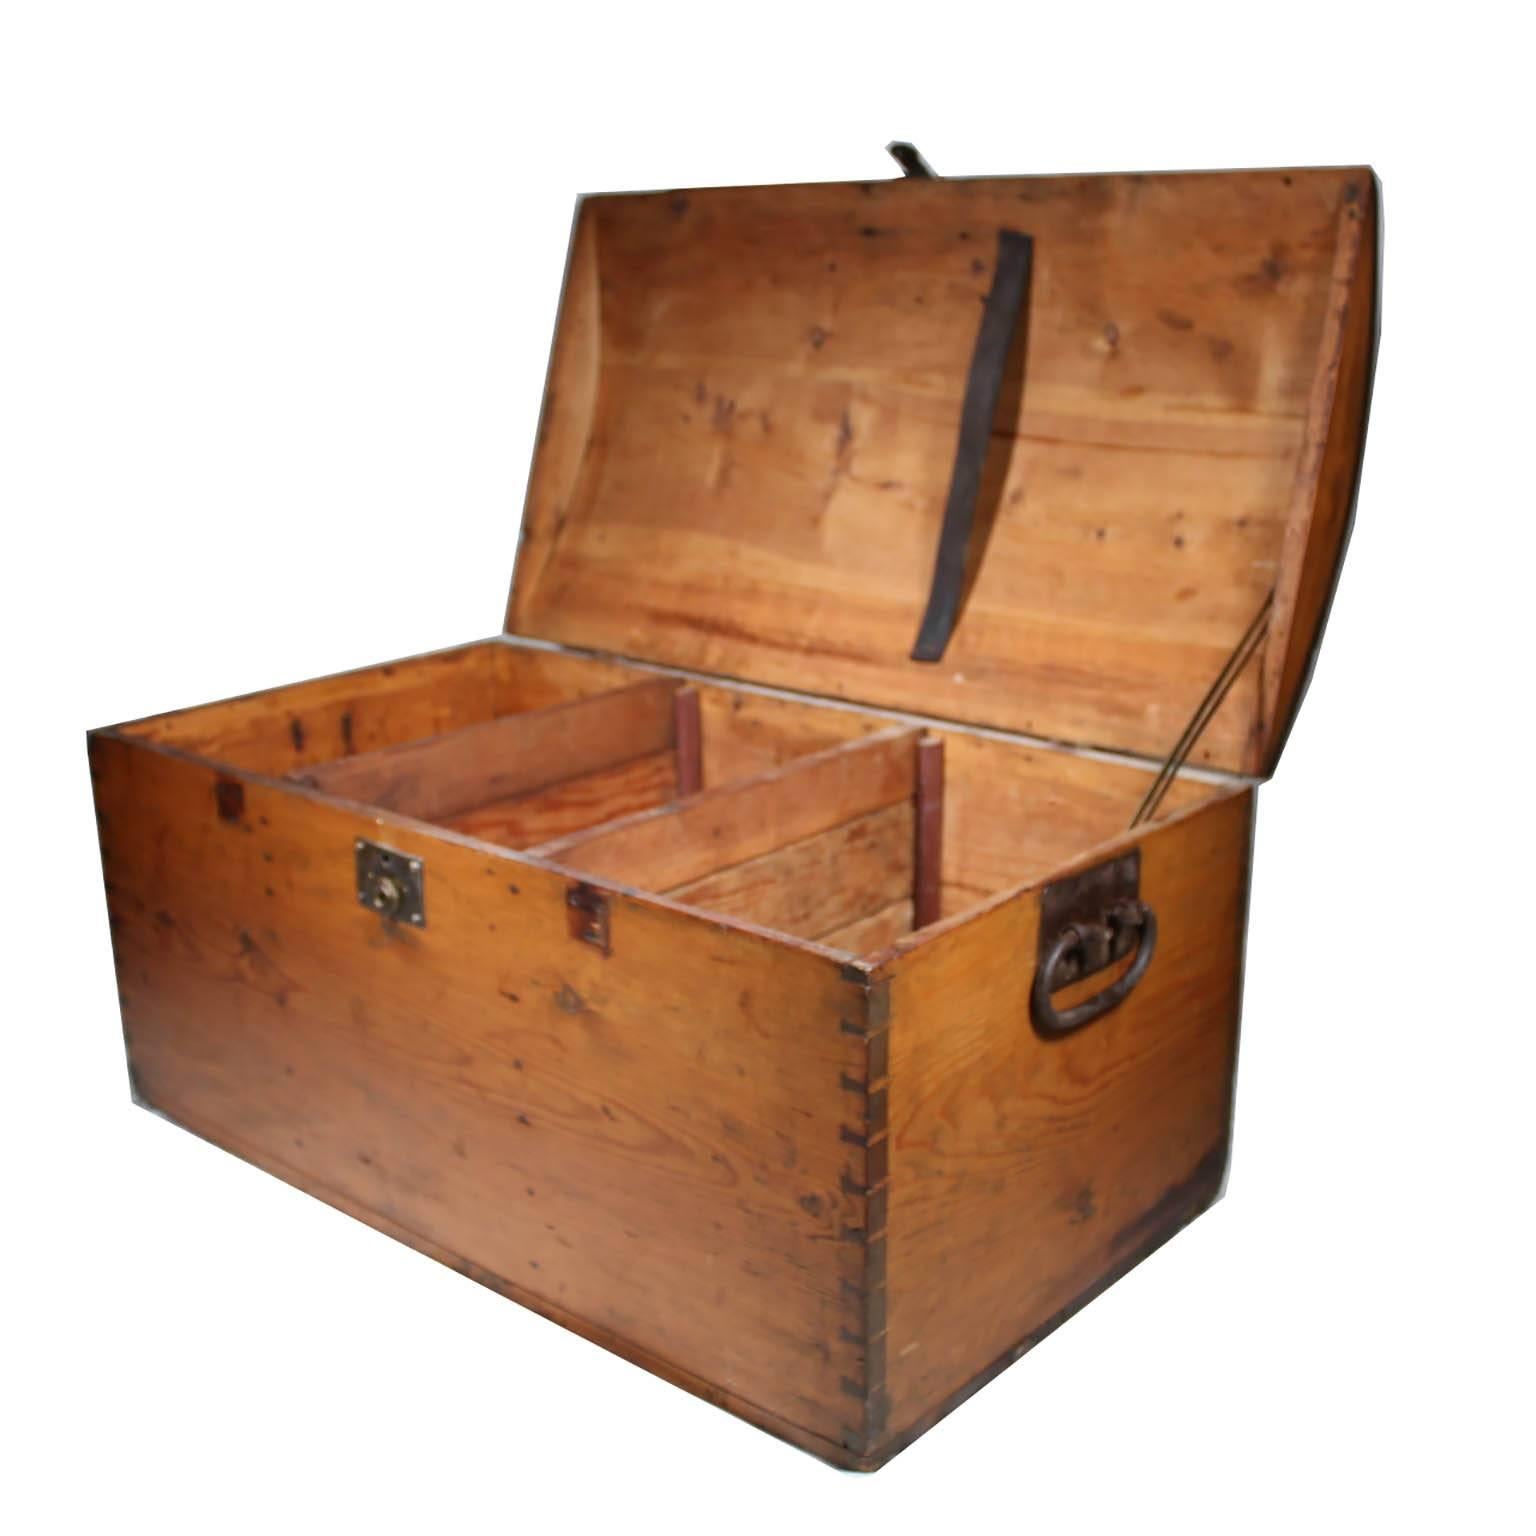 Wooden trunk with cast iron handles and latch. The interior has three vertically separated sections and a leather strap on the lid.